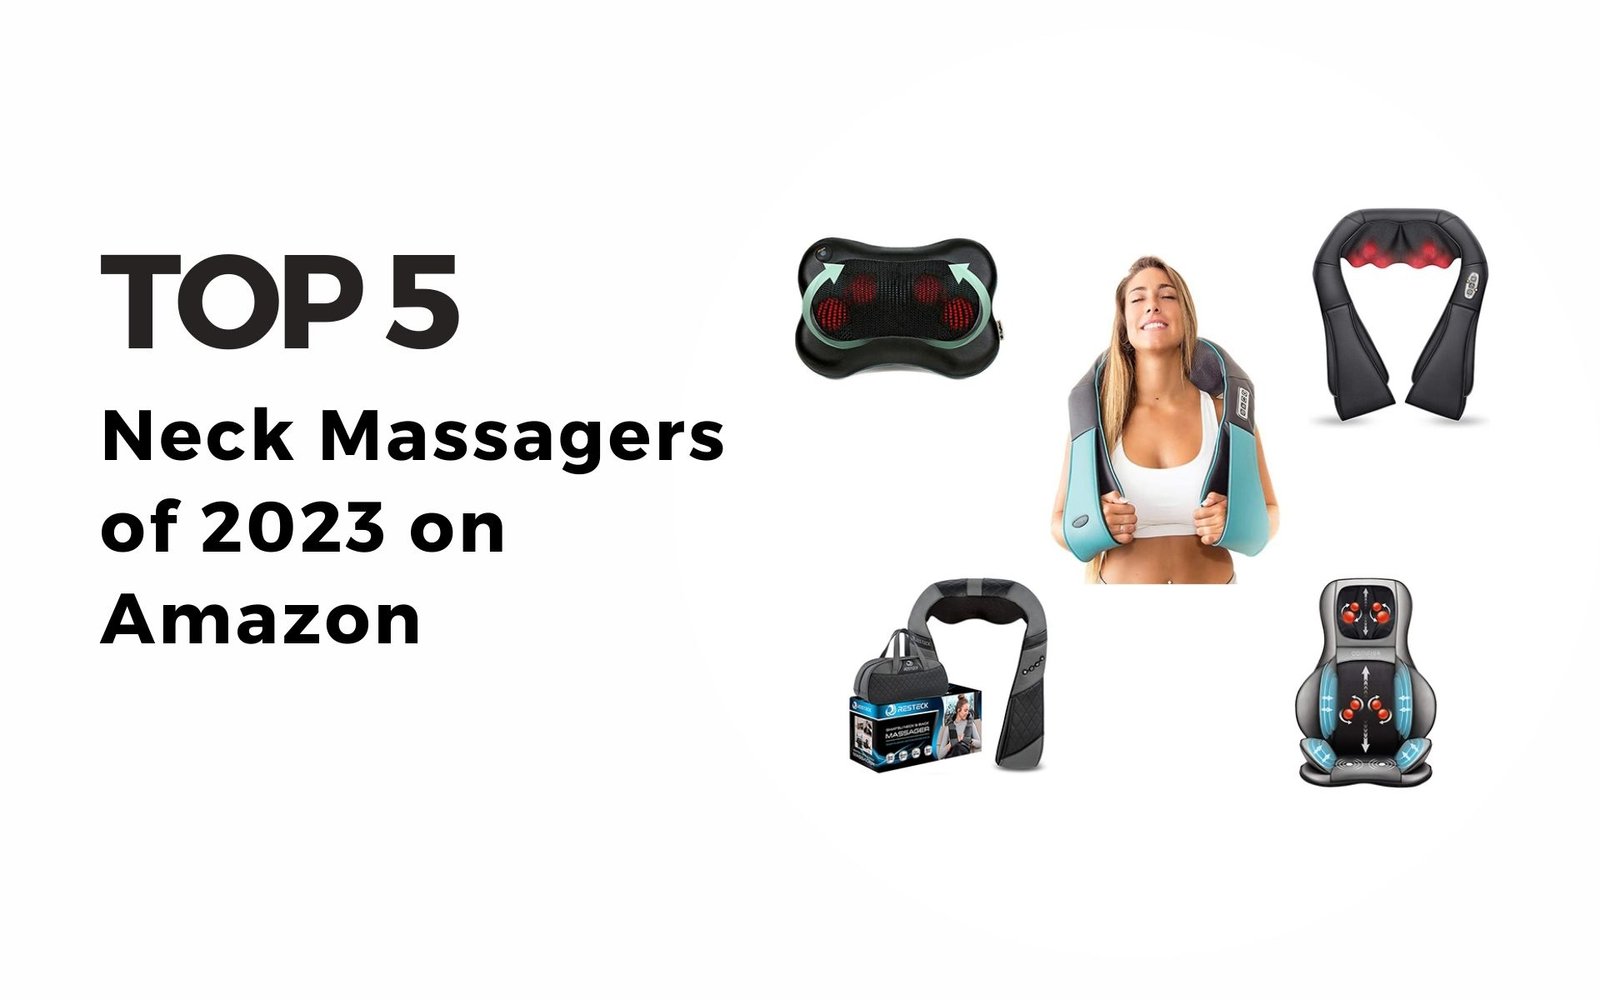 Top 5 Neck Massagers of 2023 on Amazon